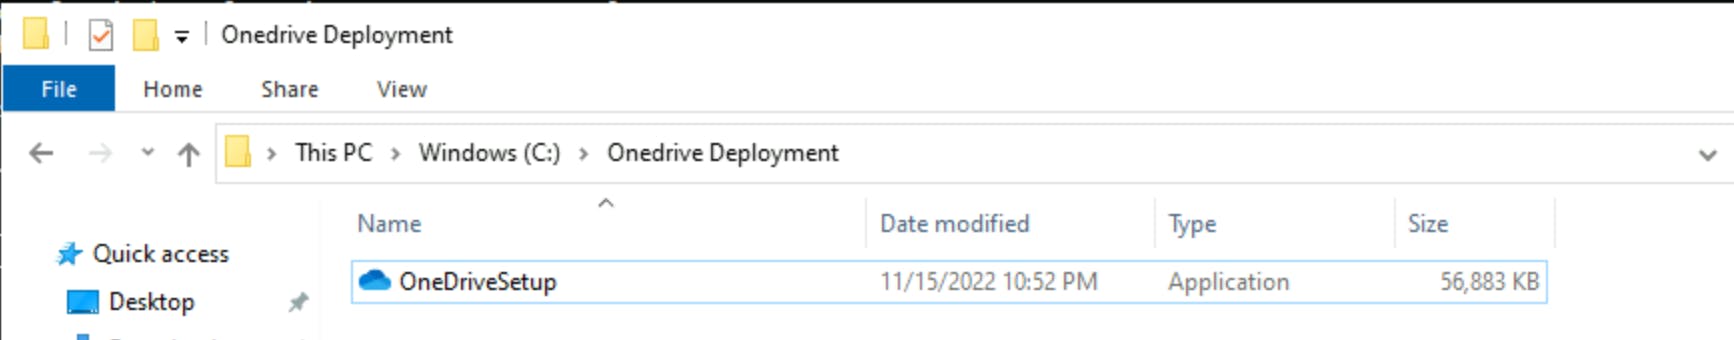 onedrive deployment files.png